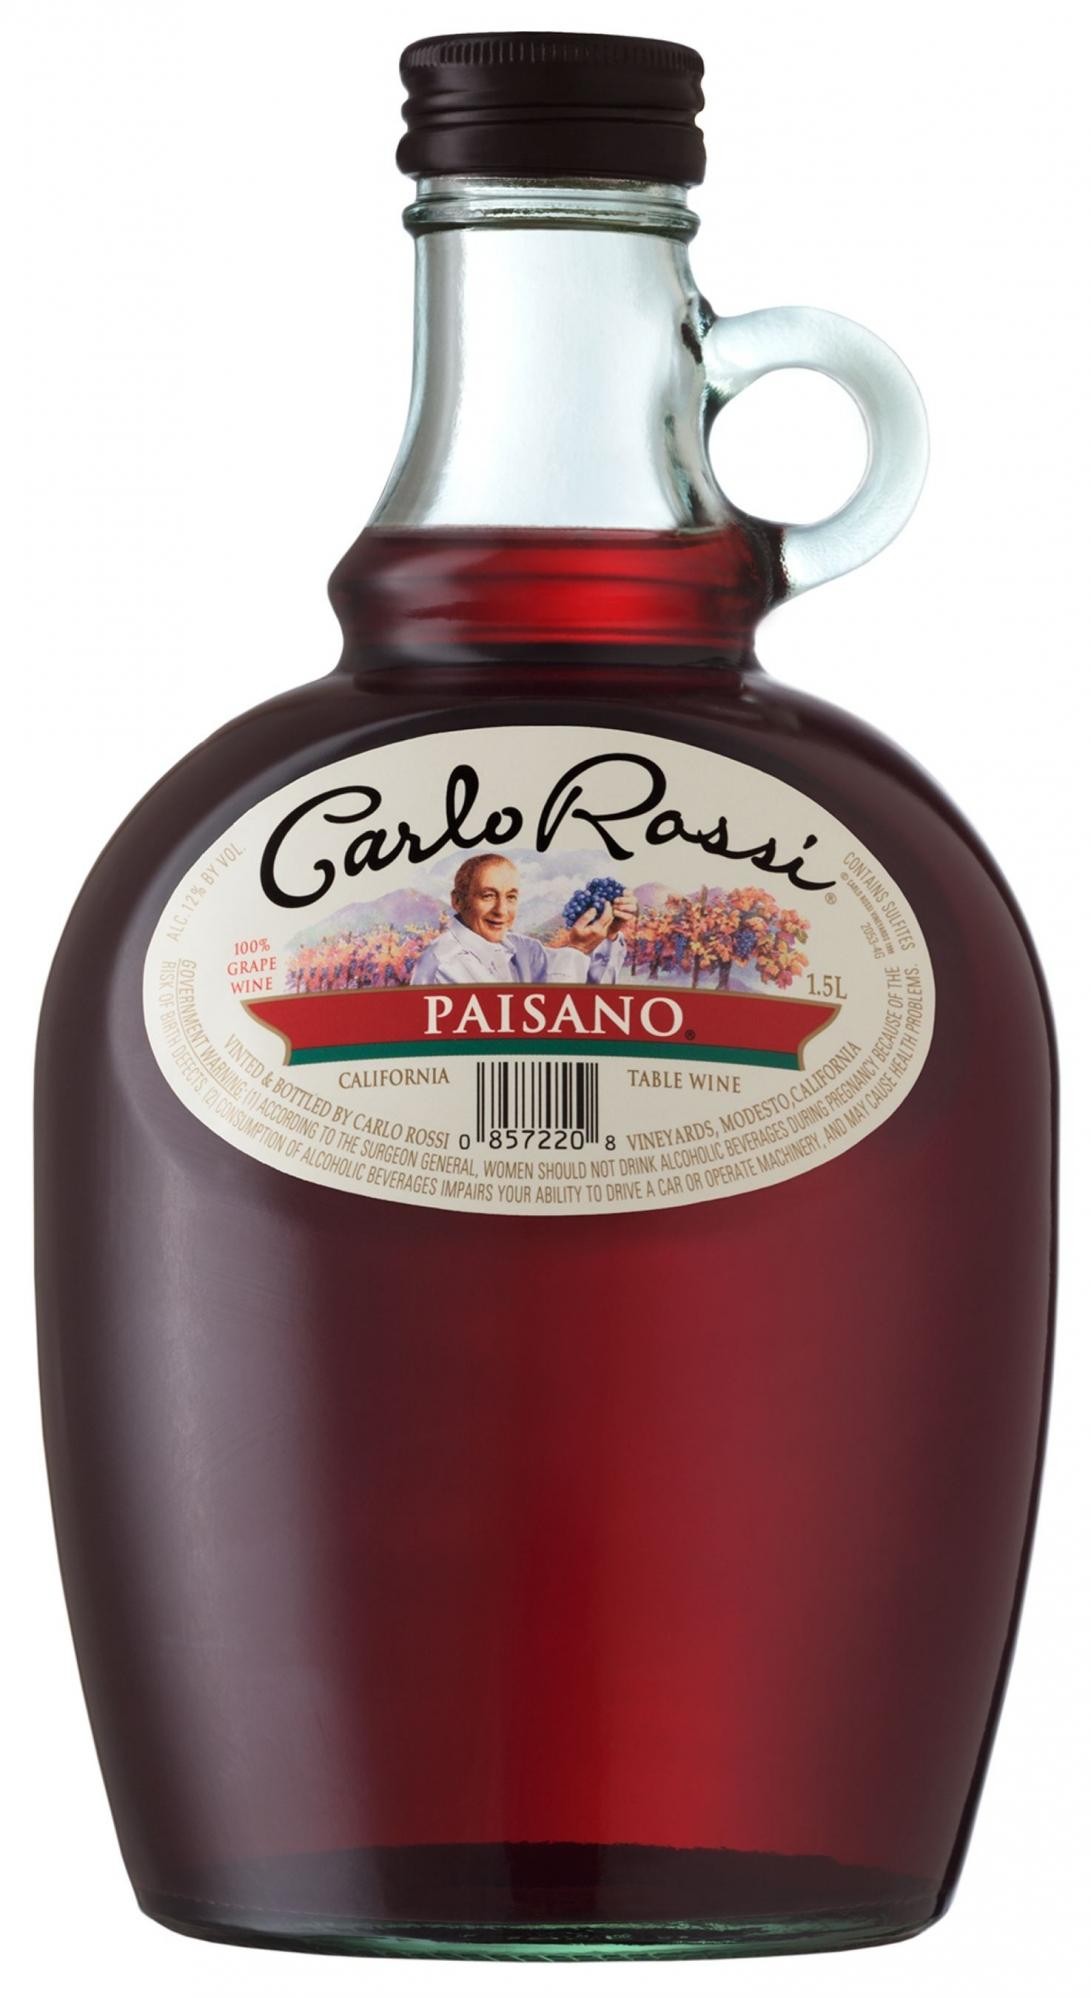 Carlo Rossi Paisano Paisano - Red Wine from California - 4L Bottle